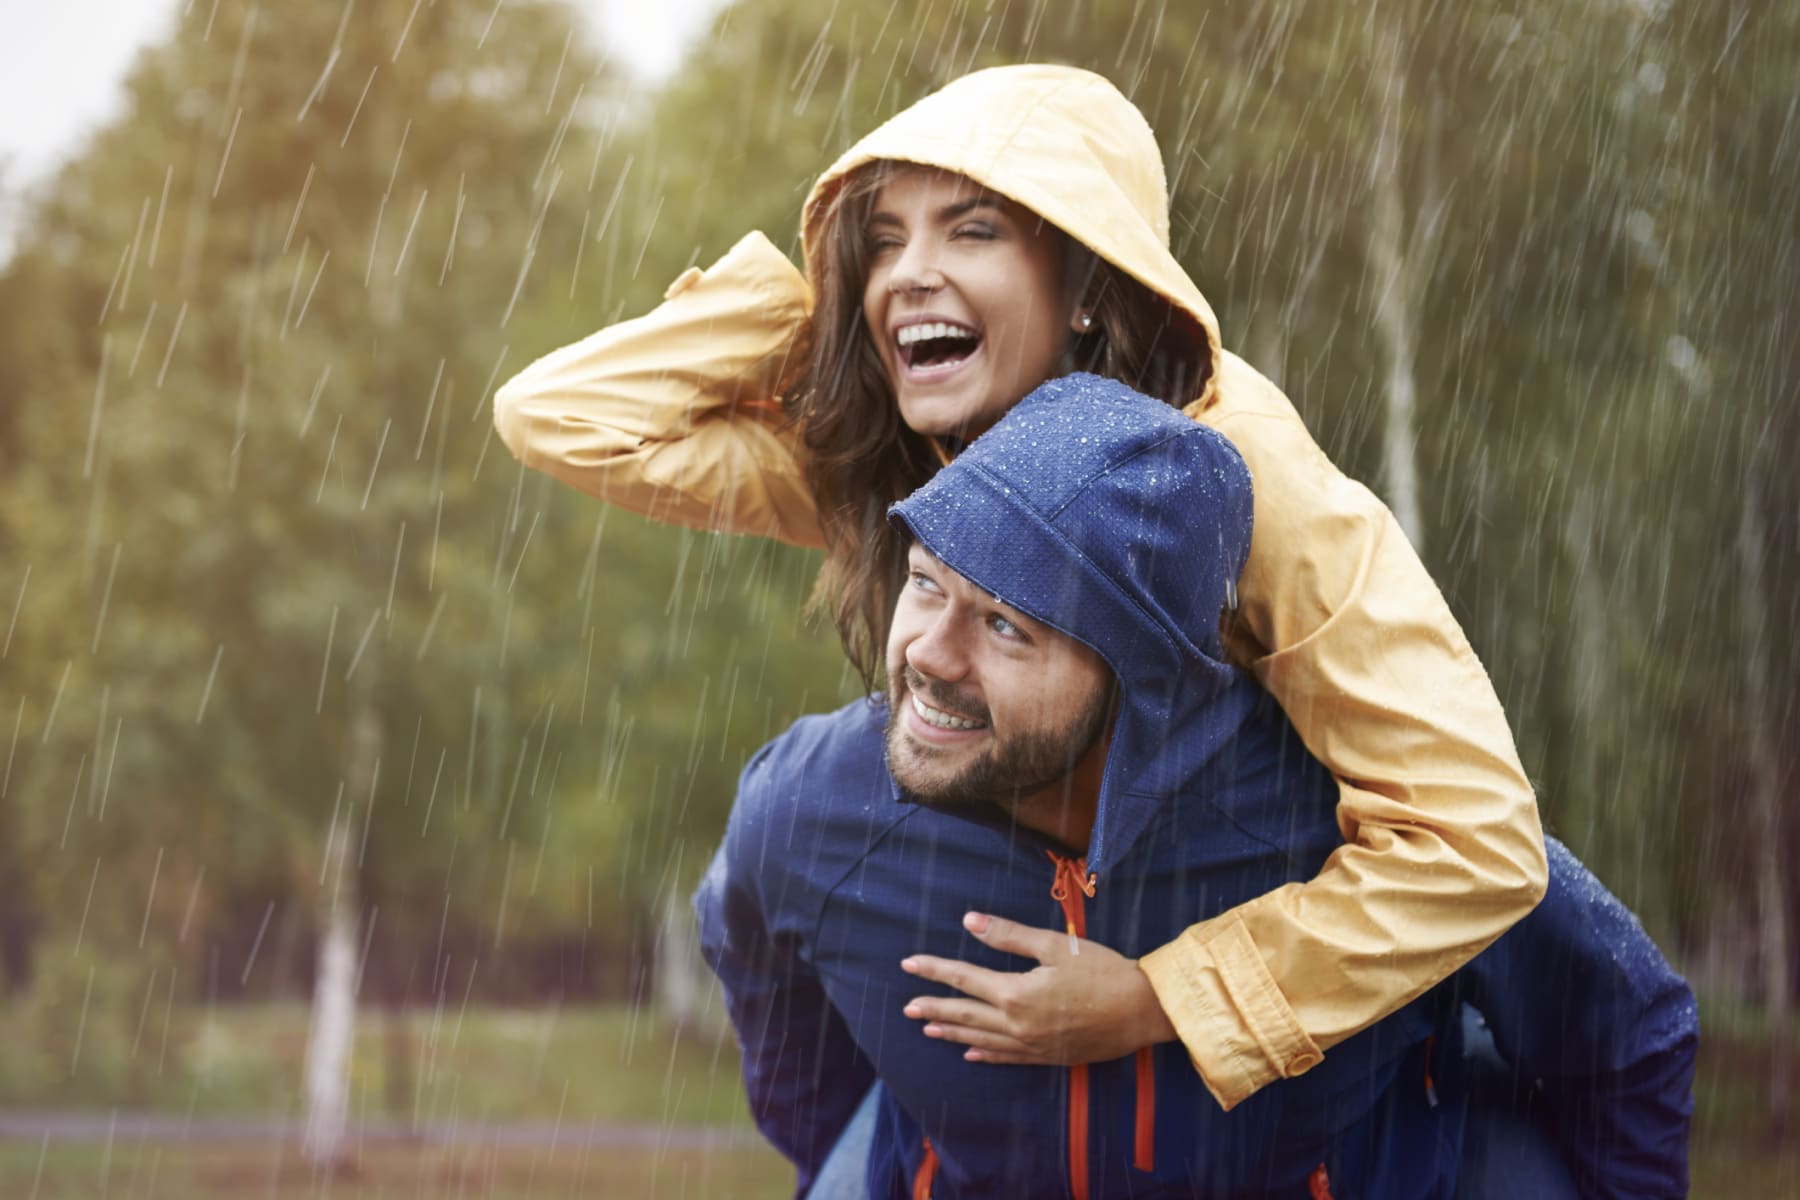 Man gives woman piggyback ride in the rain.